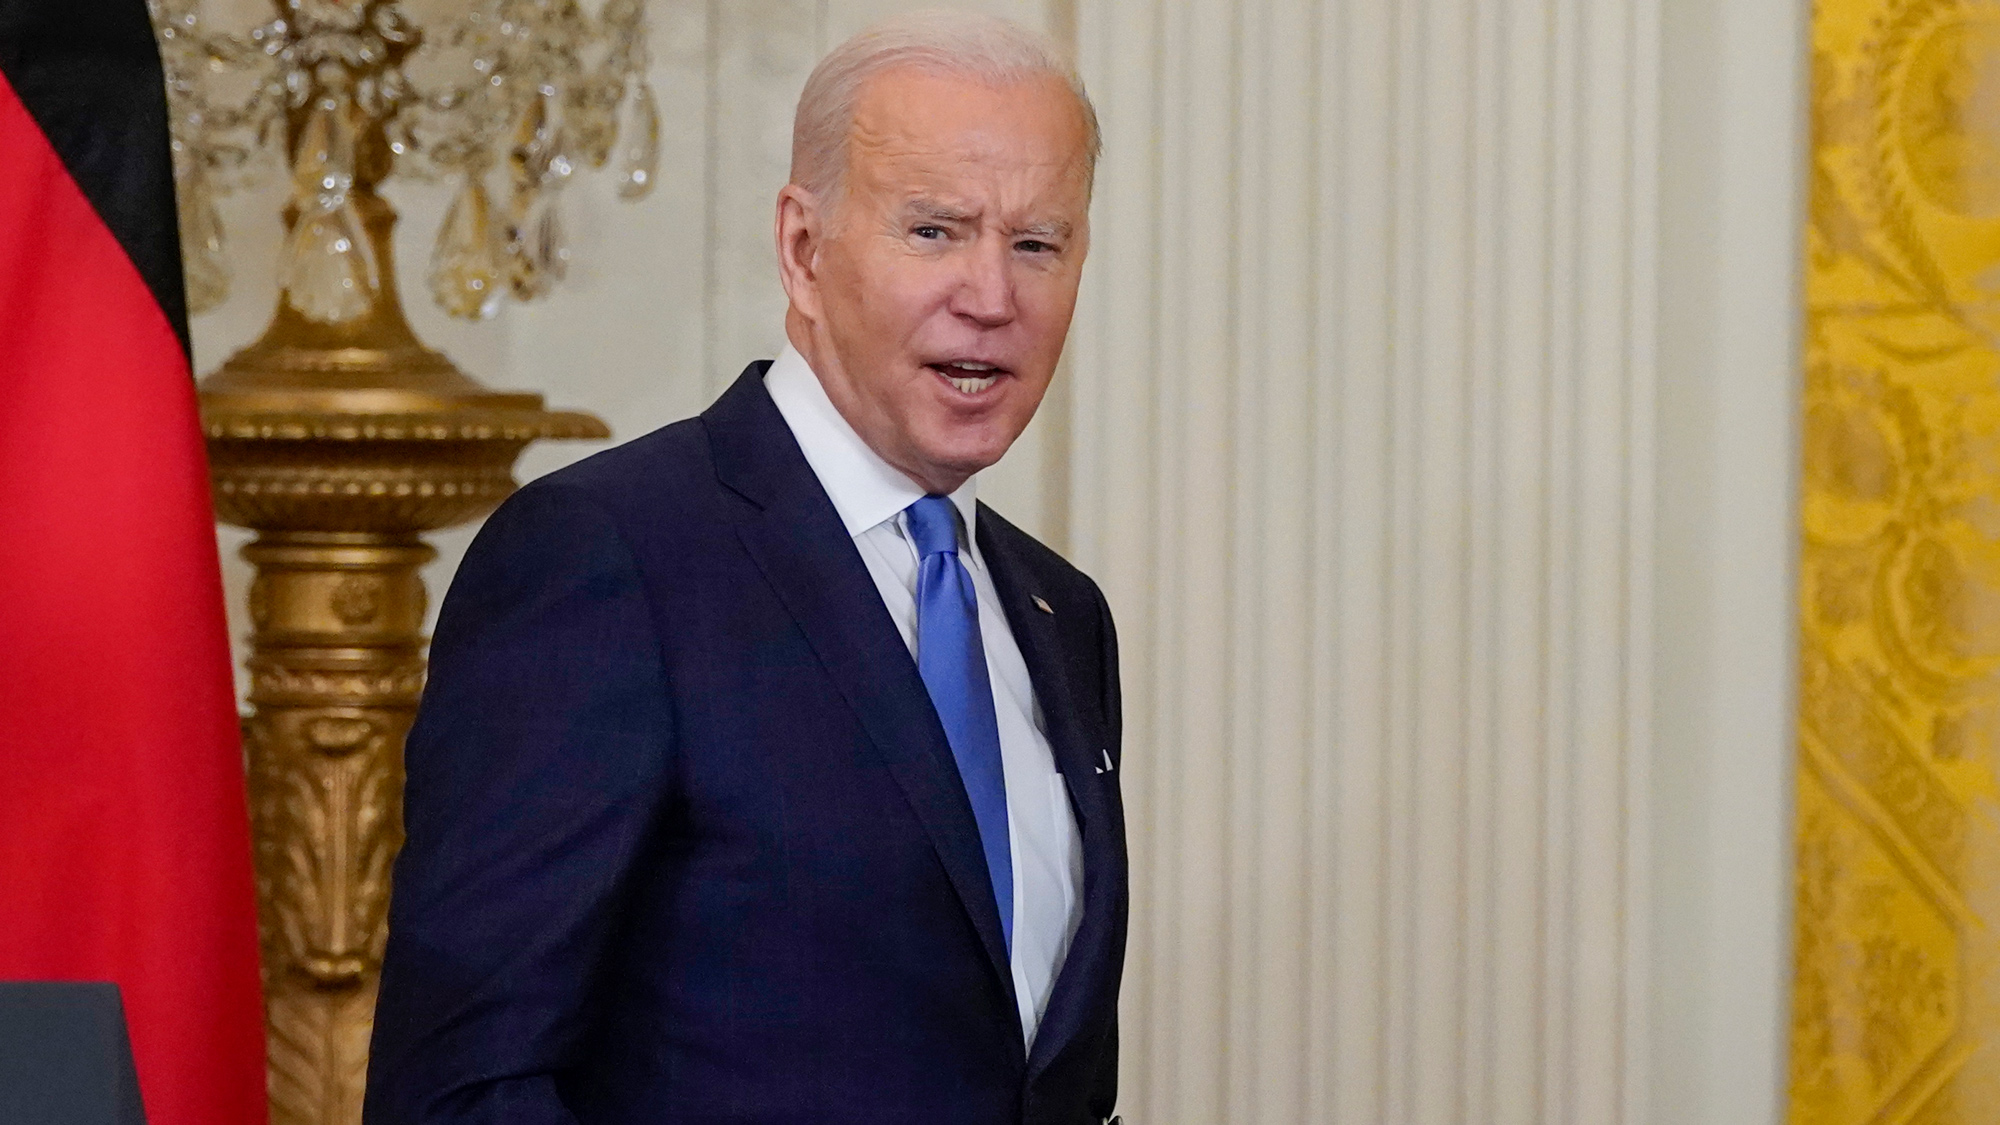 President Joe Biden answers a question shouted by a reporter after a news conference with German Chancellor Olaf Scholz in the East Room of the White House on February 7 in Washington, DC.